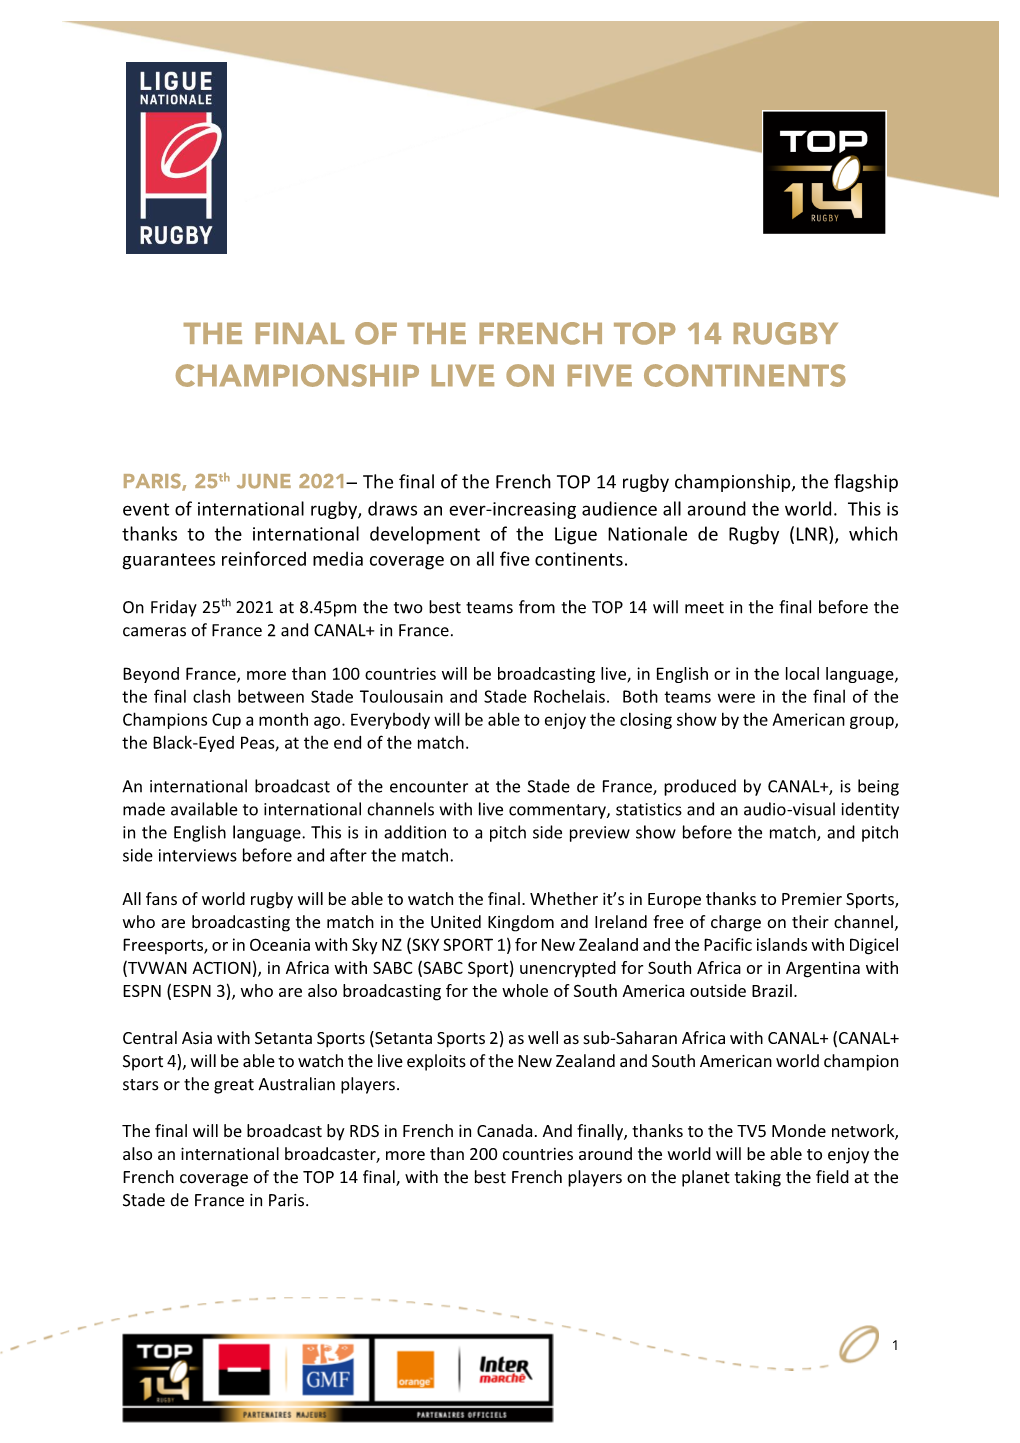 The Final of the French Top 14 Rugby Championship Live on Five Continents